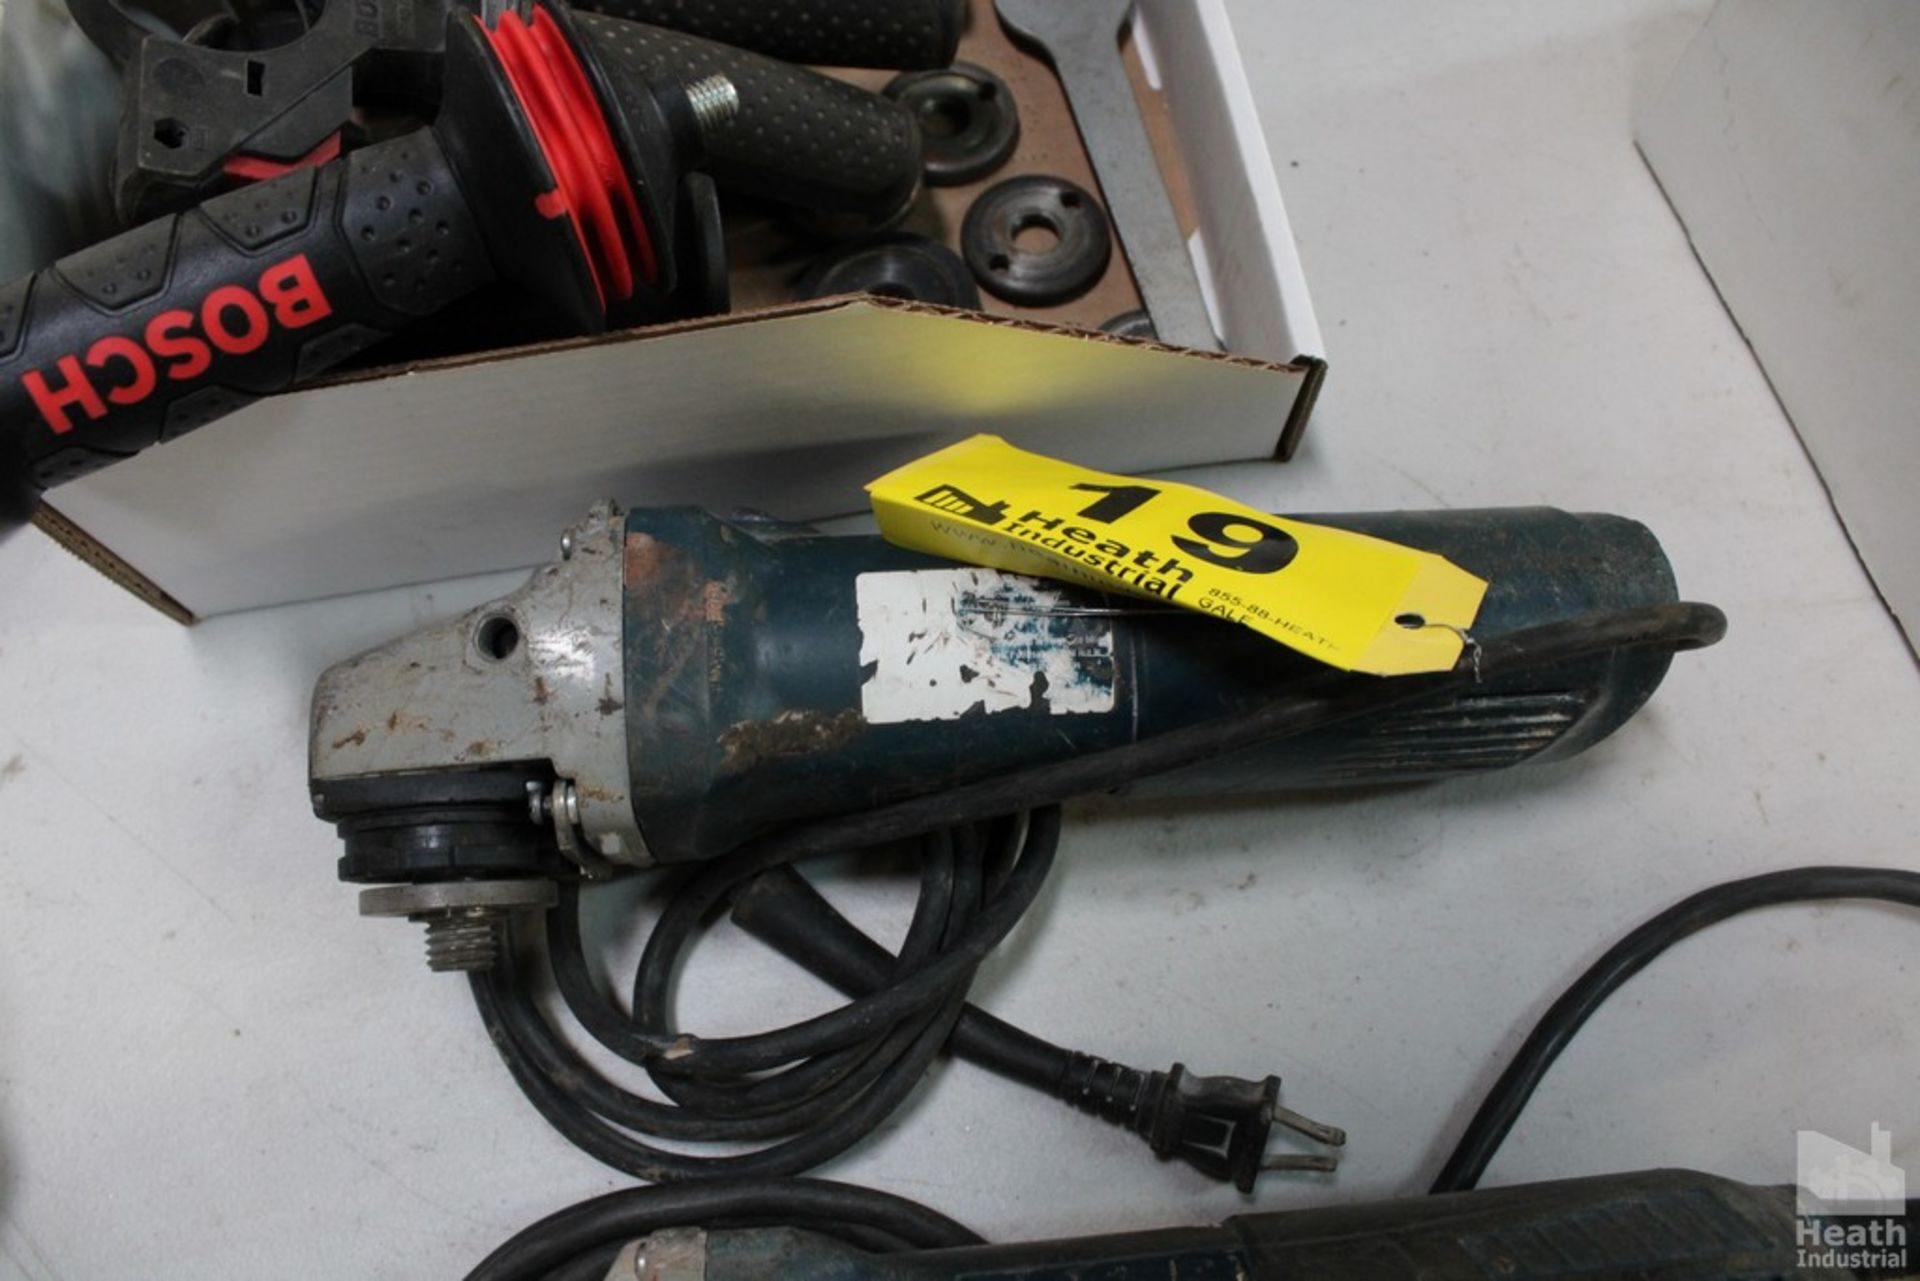 BOSCH RIGHT ANGLE GRINDER